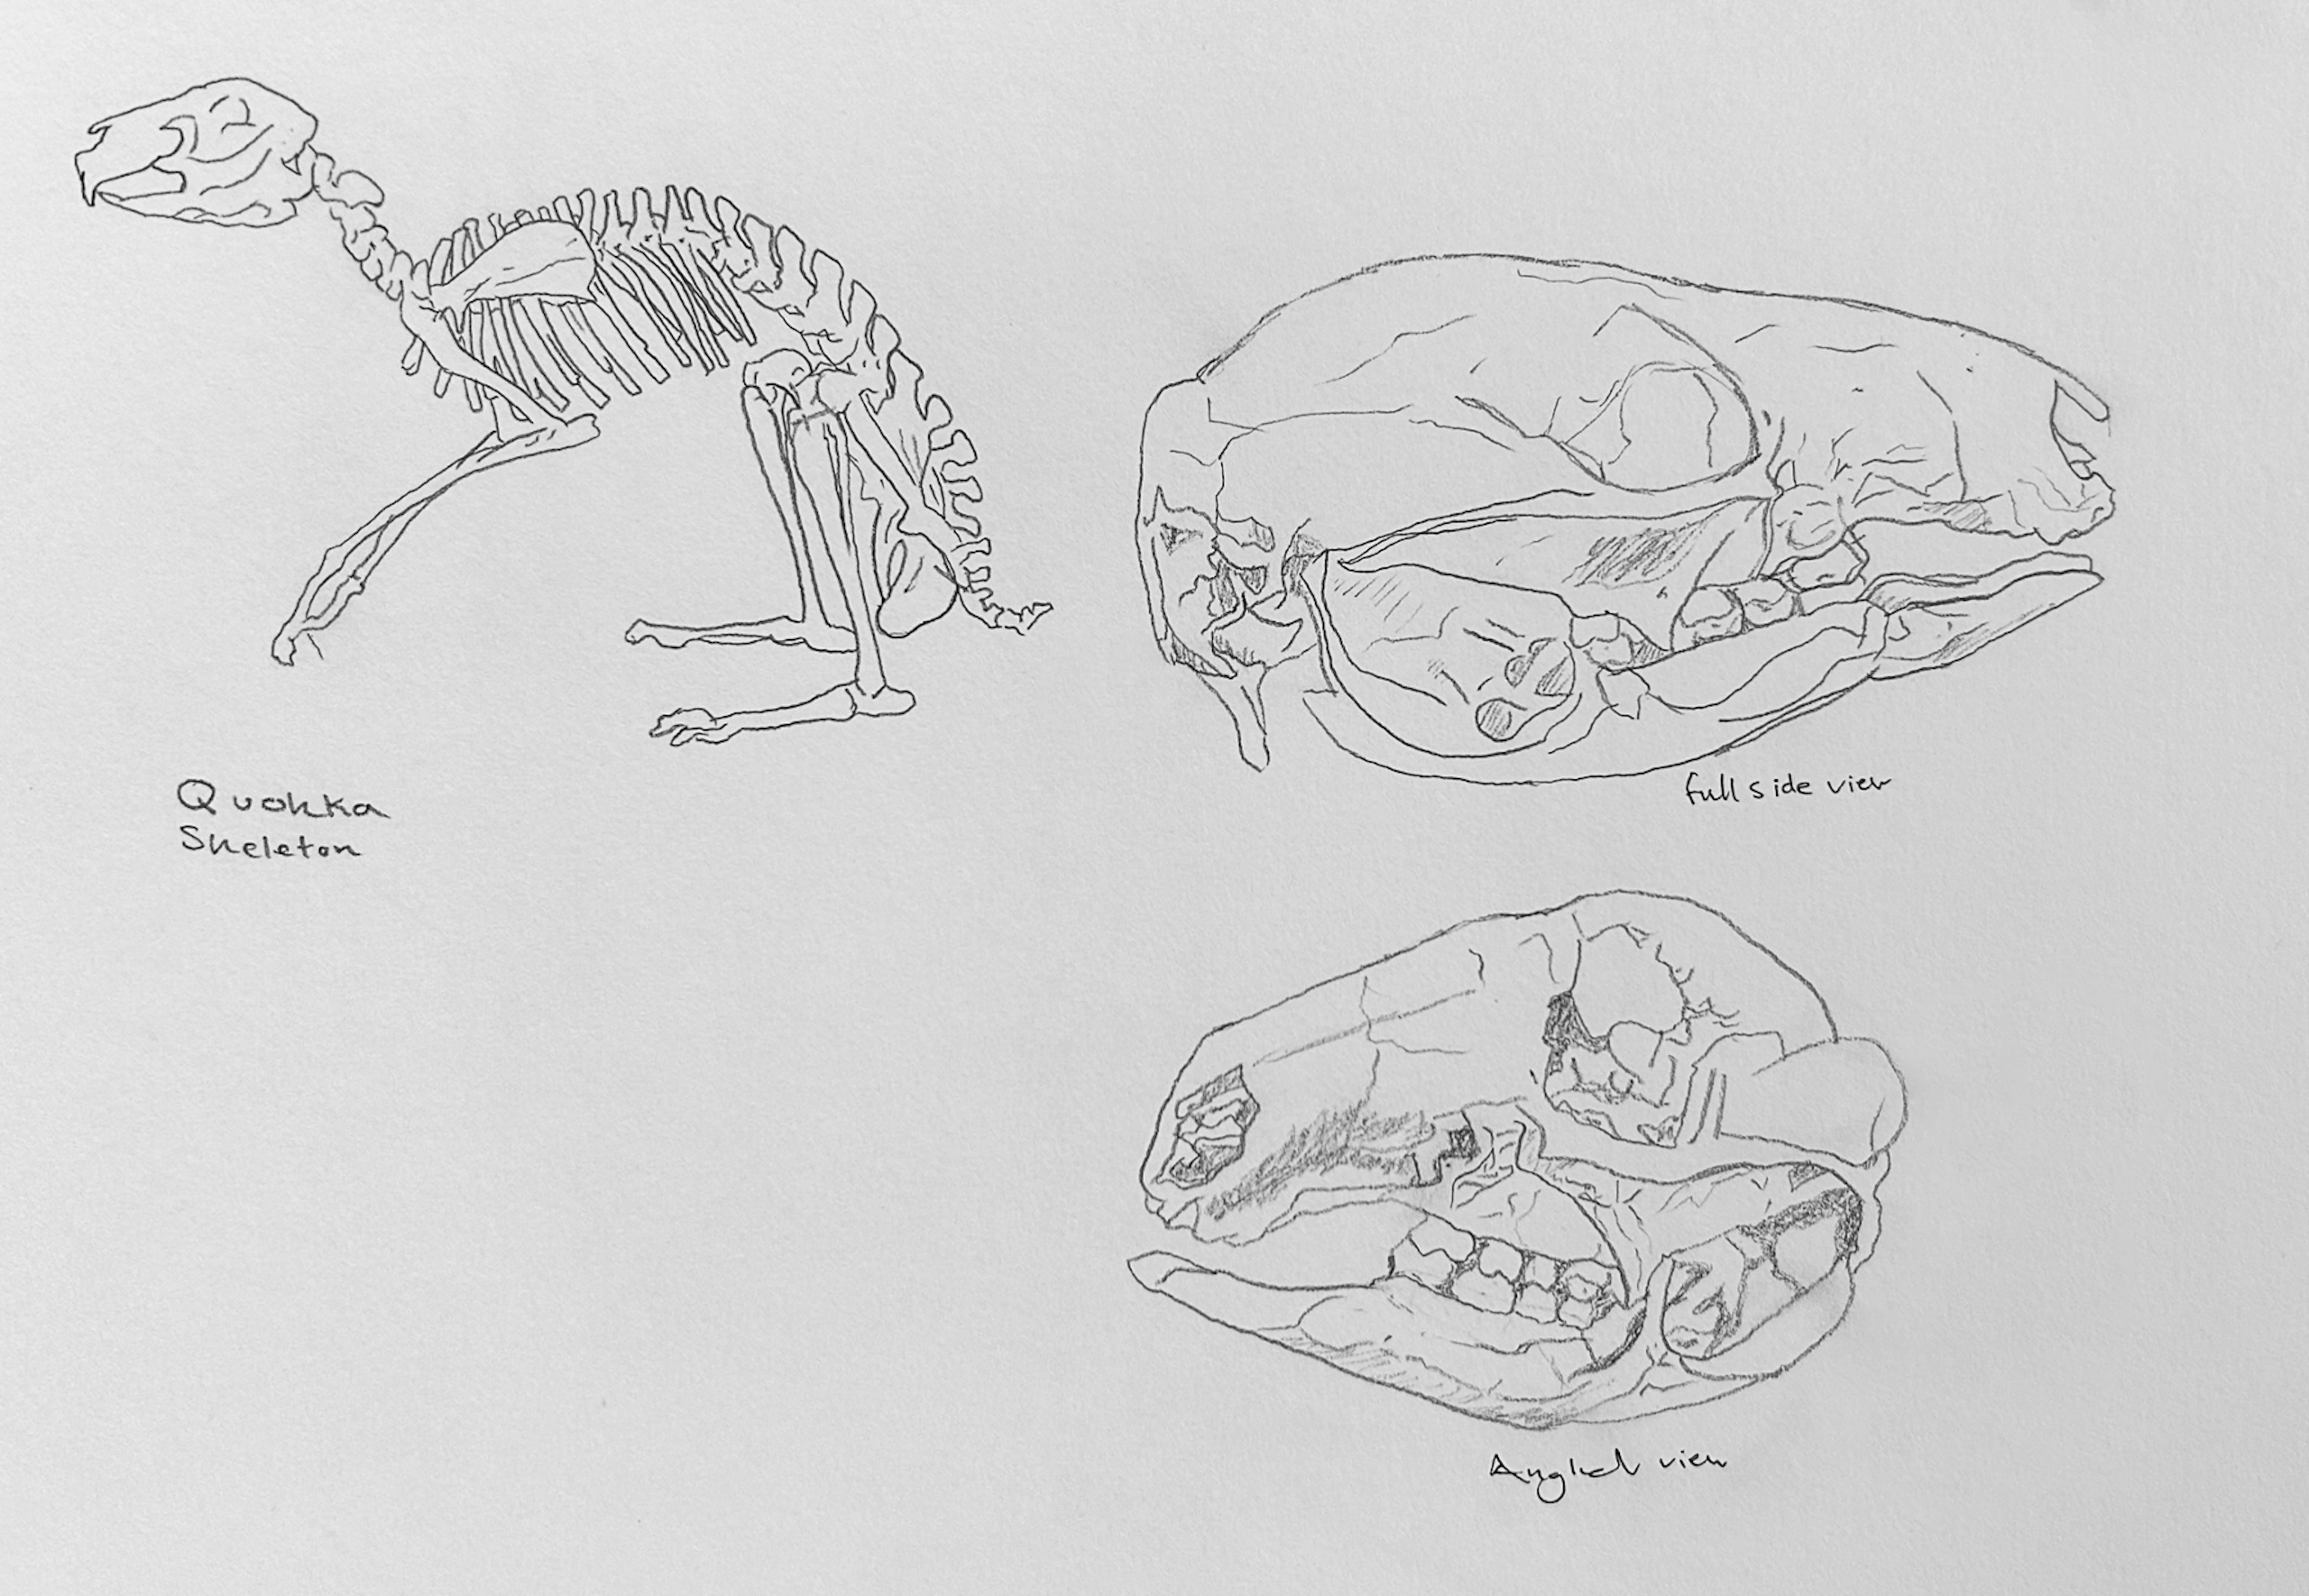 Exploratory sketches of the quokka’s skeletal structure, crucial for understanding its unique shape; resembling a smaller kangaroo. Alongside, intricate skull drawings based on scientific anatomical photographs, challenging due to their small size, further enriched the study.